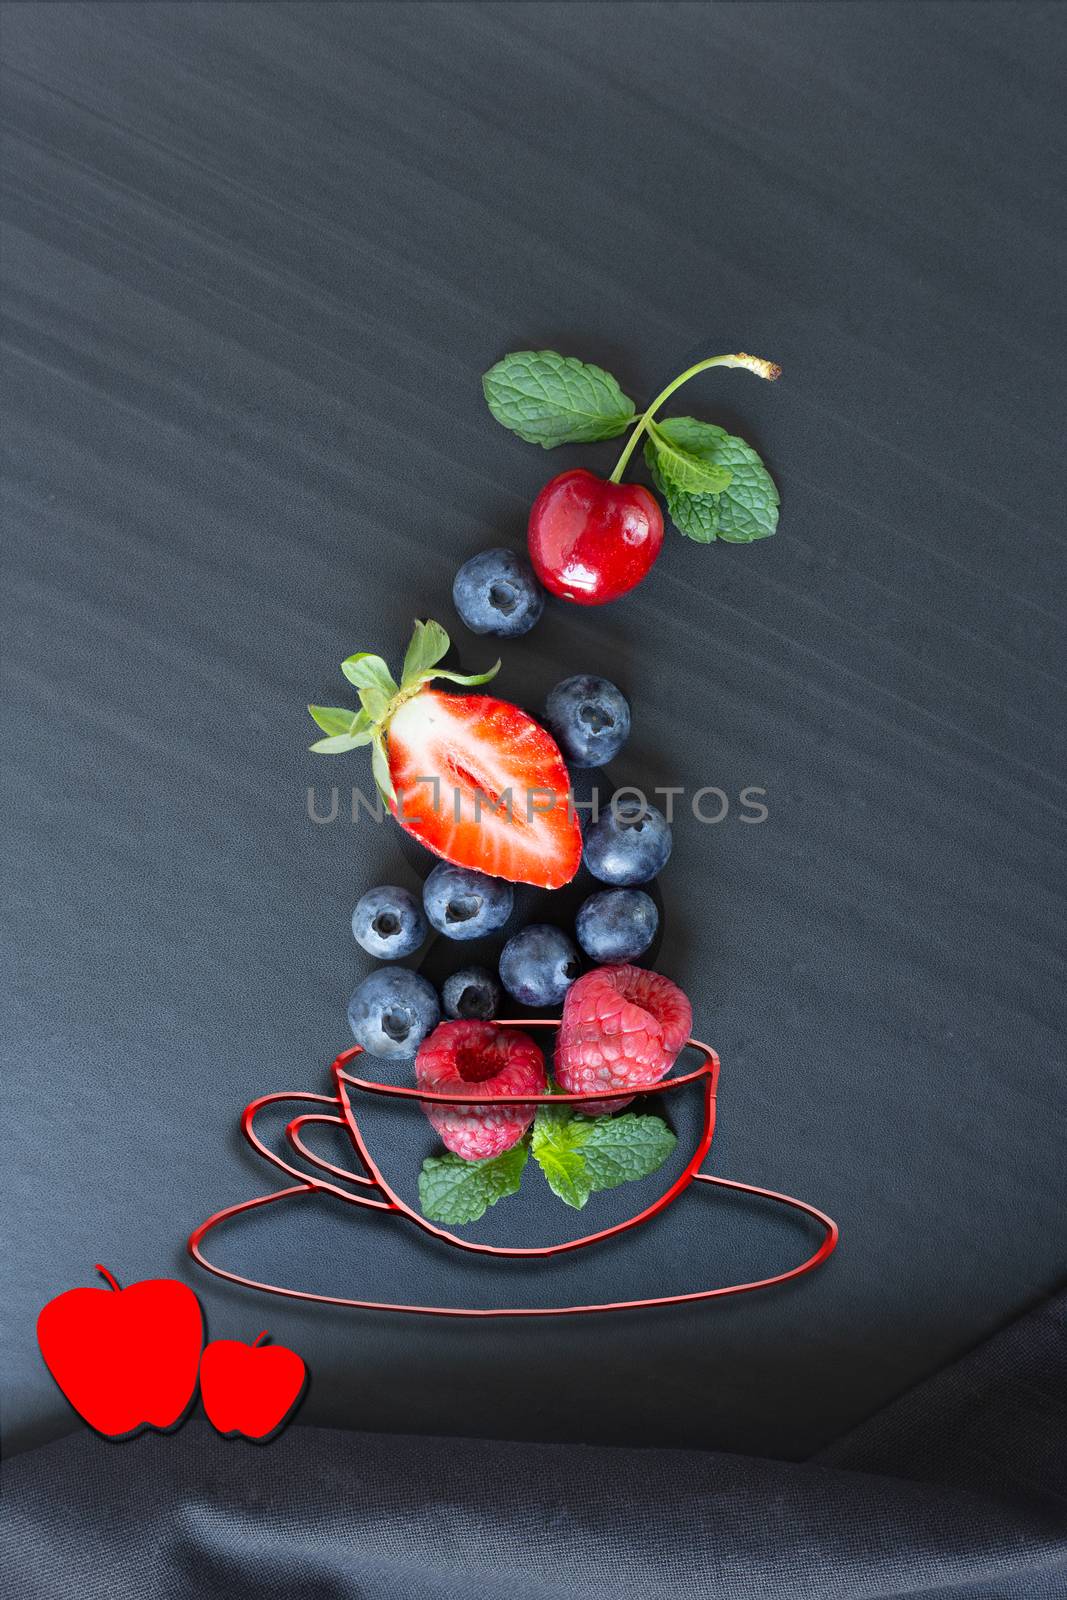 Summer fruits, berries and mint in icons cup of tea and apples on black background. Conceptual healthy, vitamin, dietary food. Vegan, vegetarian and detox food and drinks. Menu mock up for cafe, poster concept